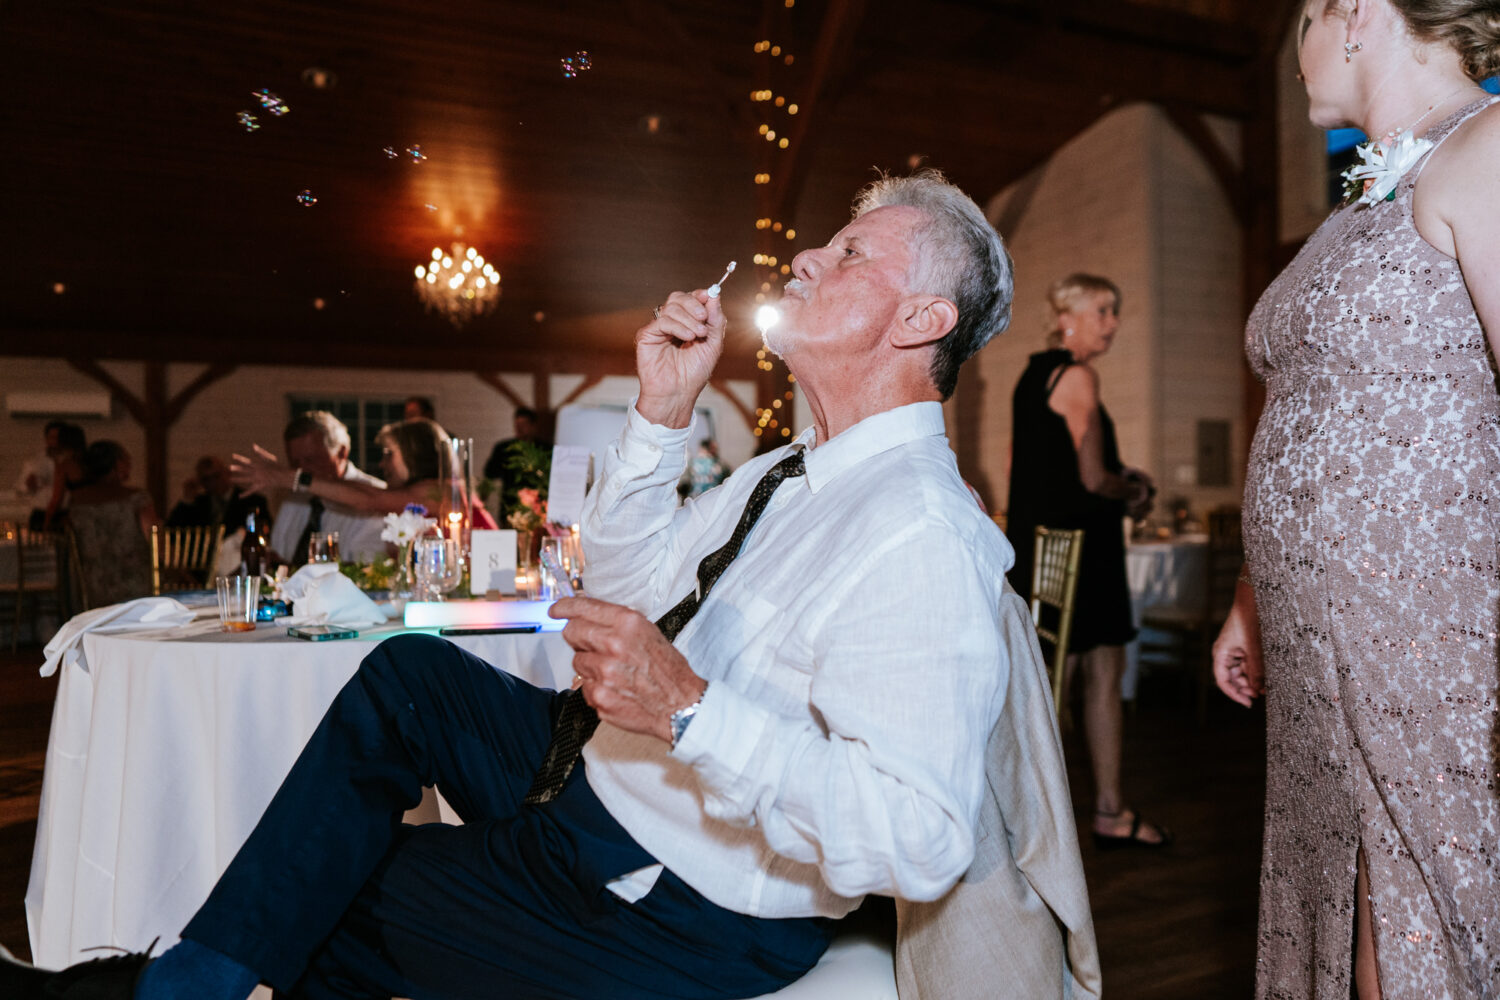 uncle of the bride blowing bubbles during the wedding reception